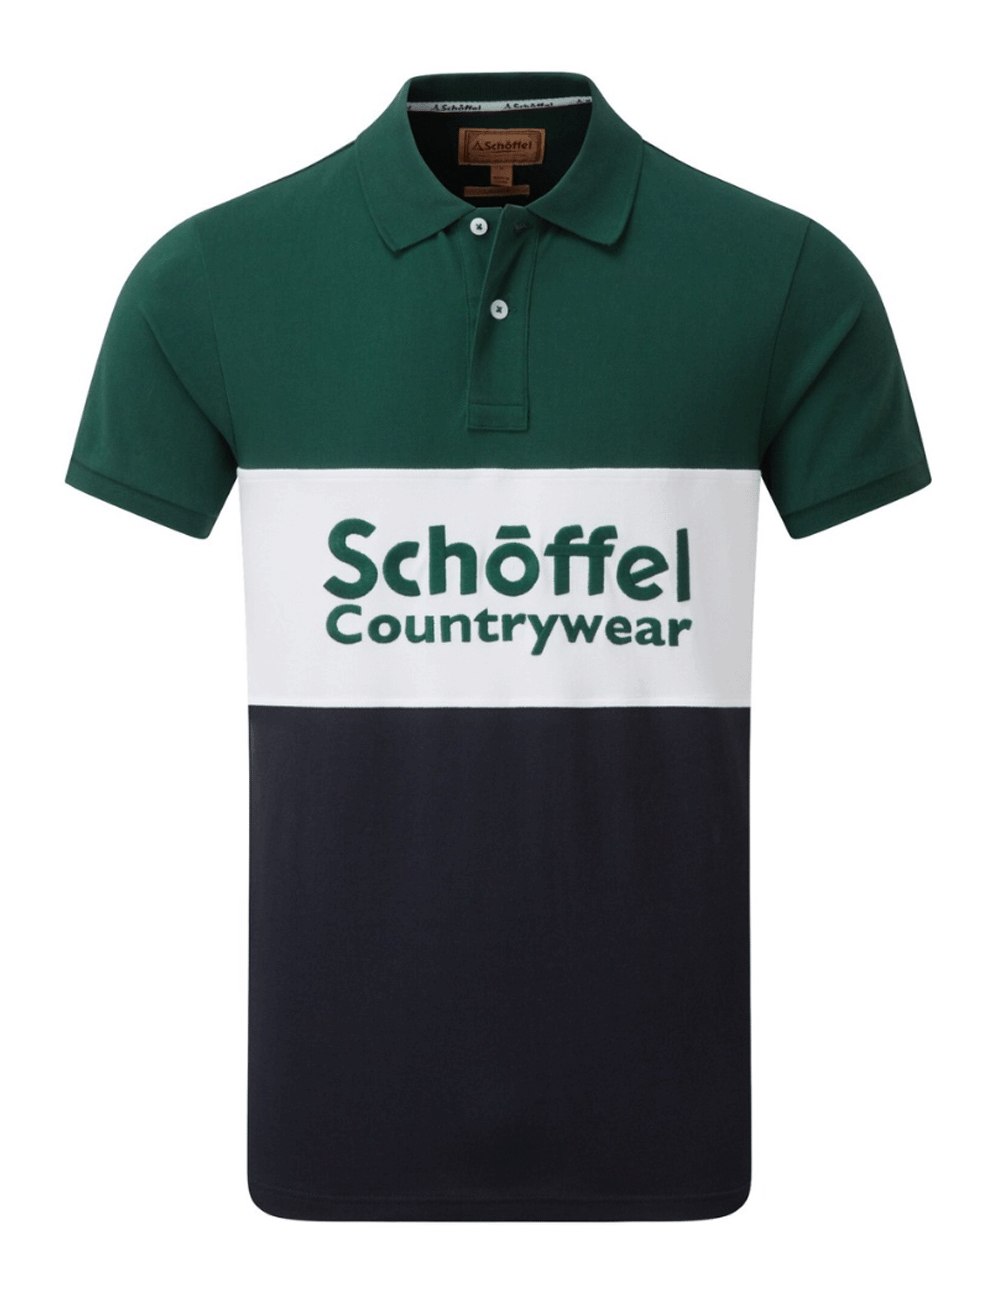 Schoffel' s Exeter Polo Shirt on a white background